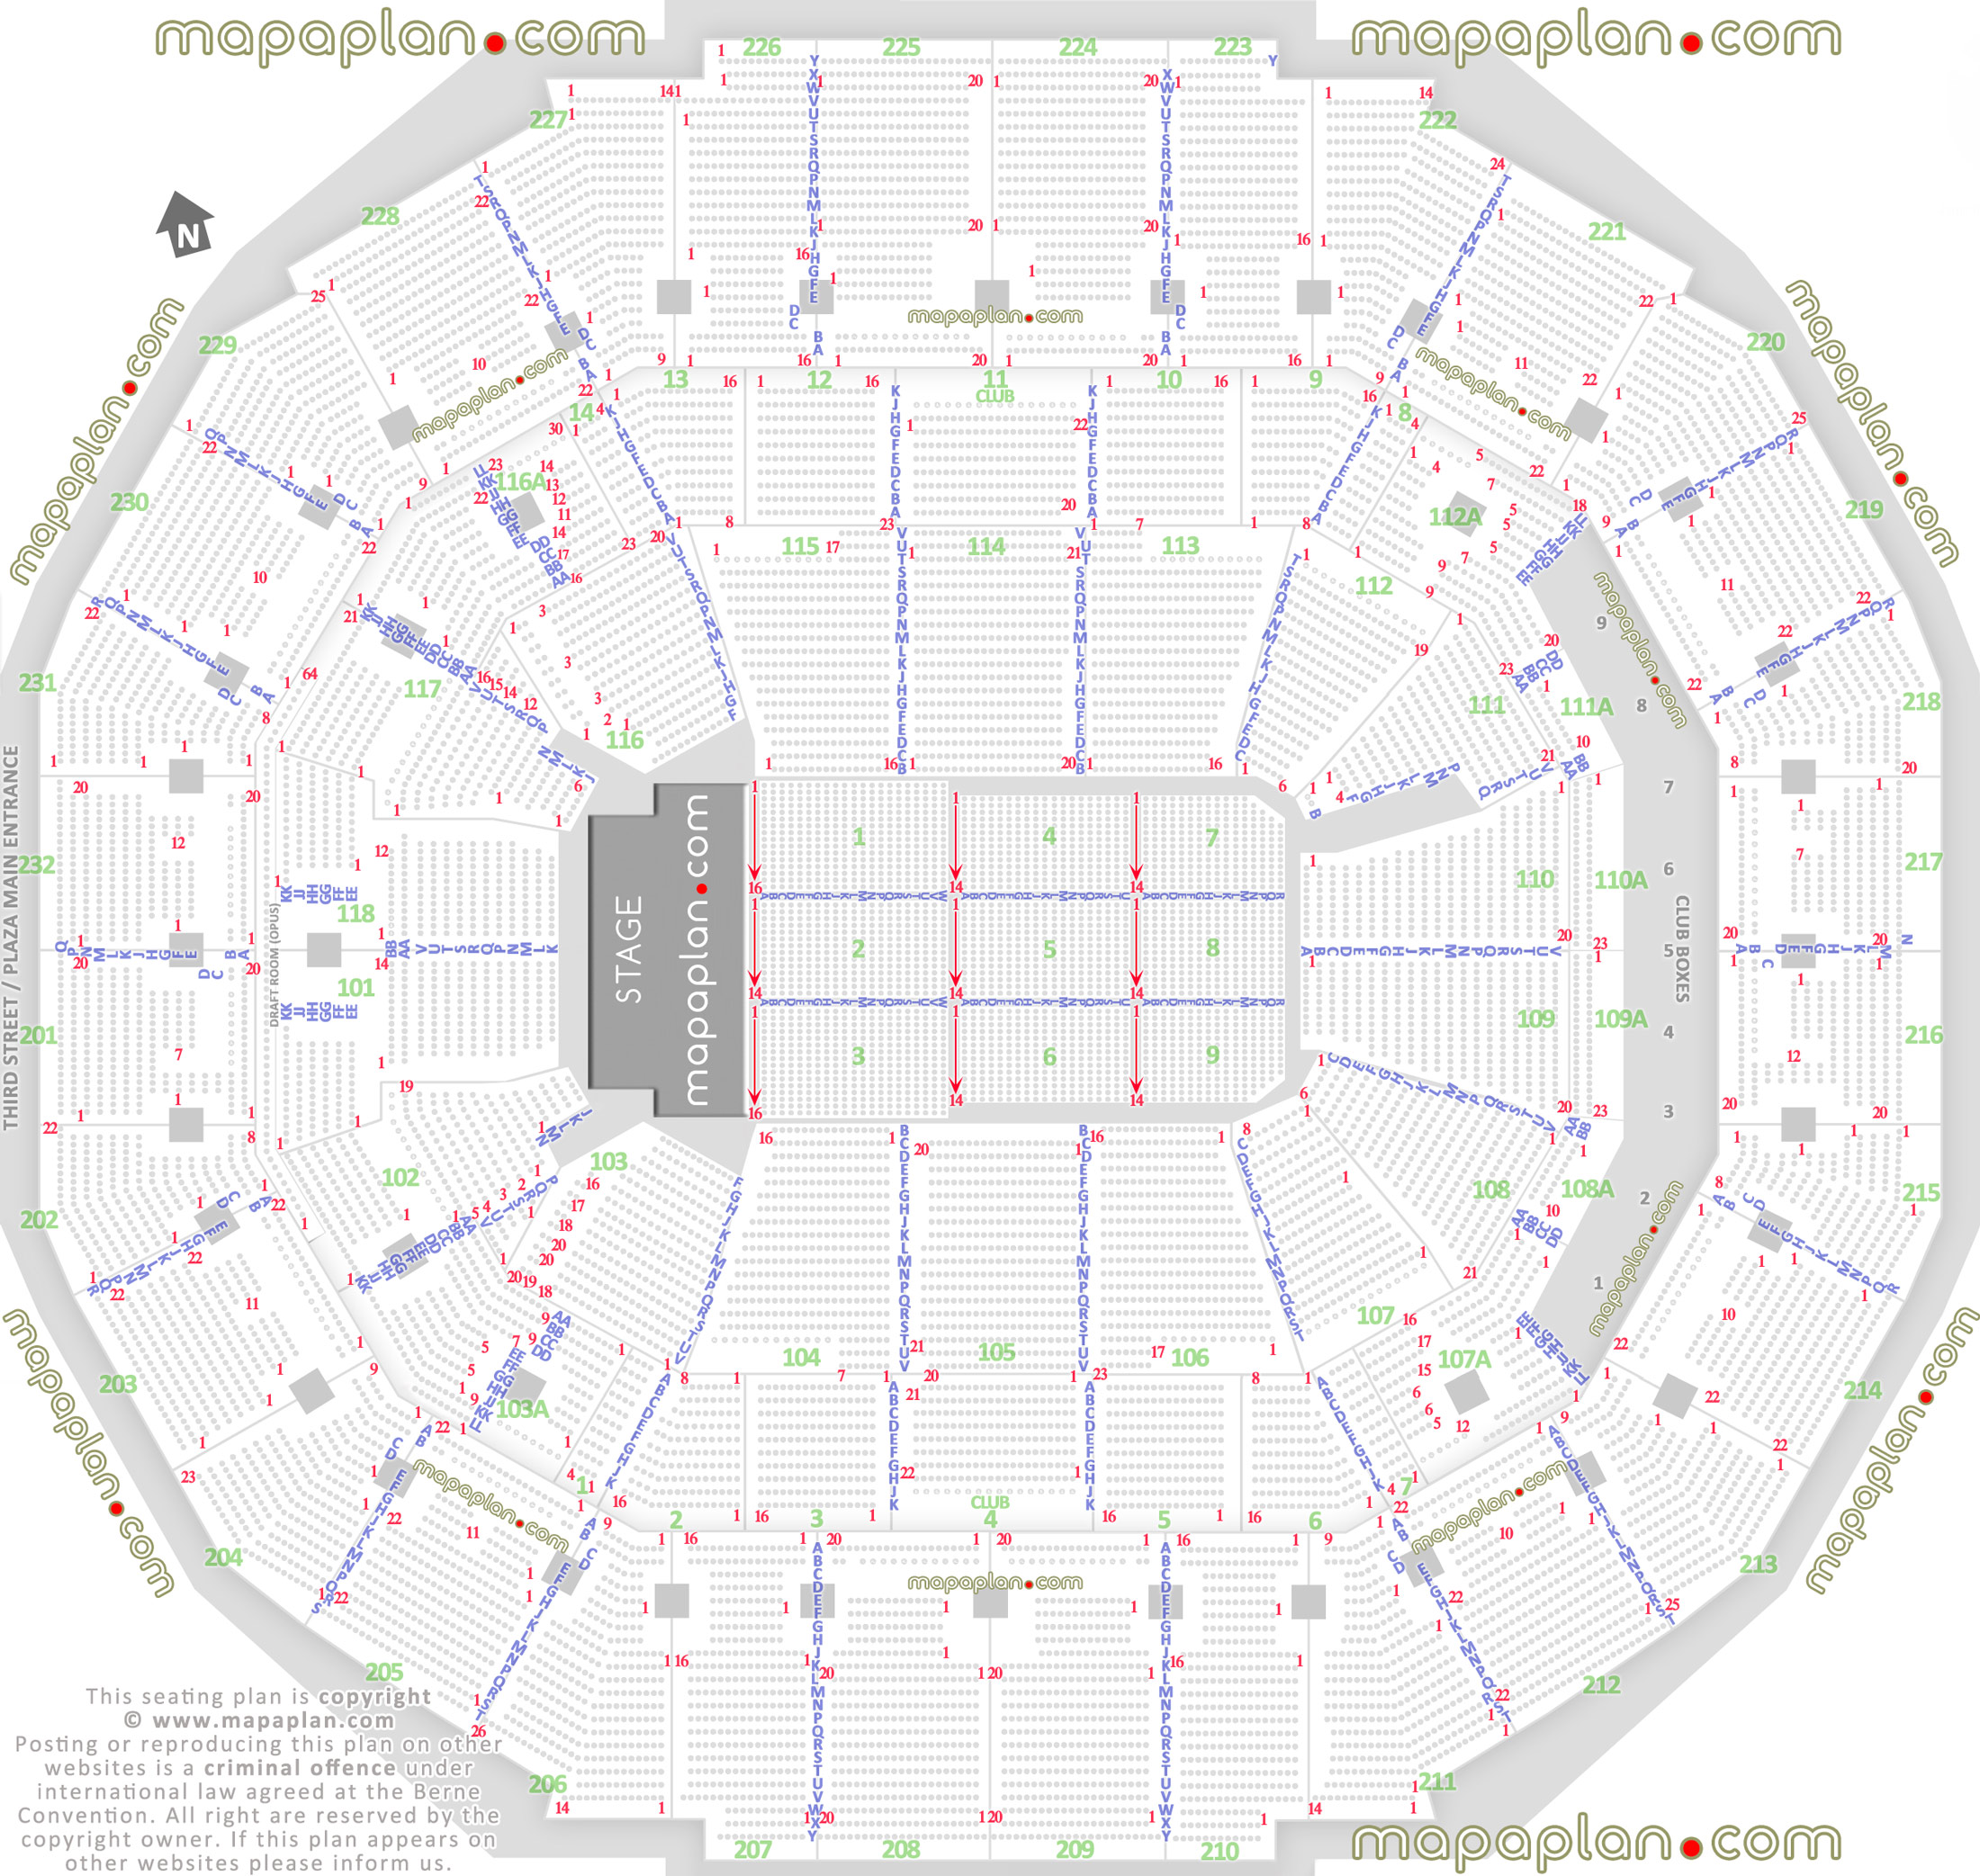 Fedex Forum Seating Chart With Seat Numbers